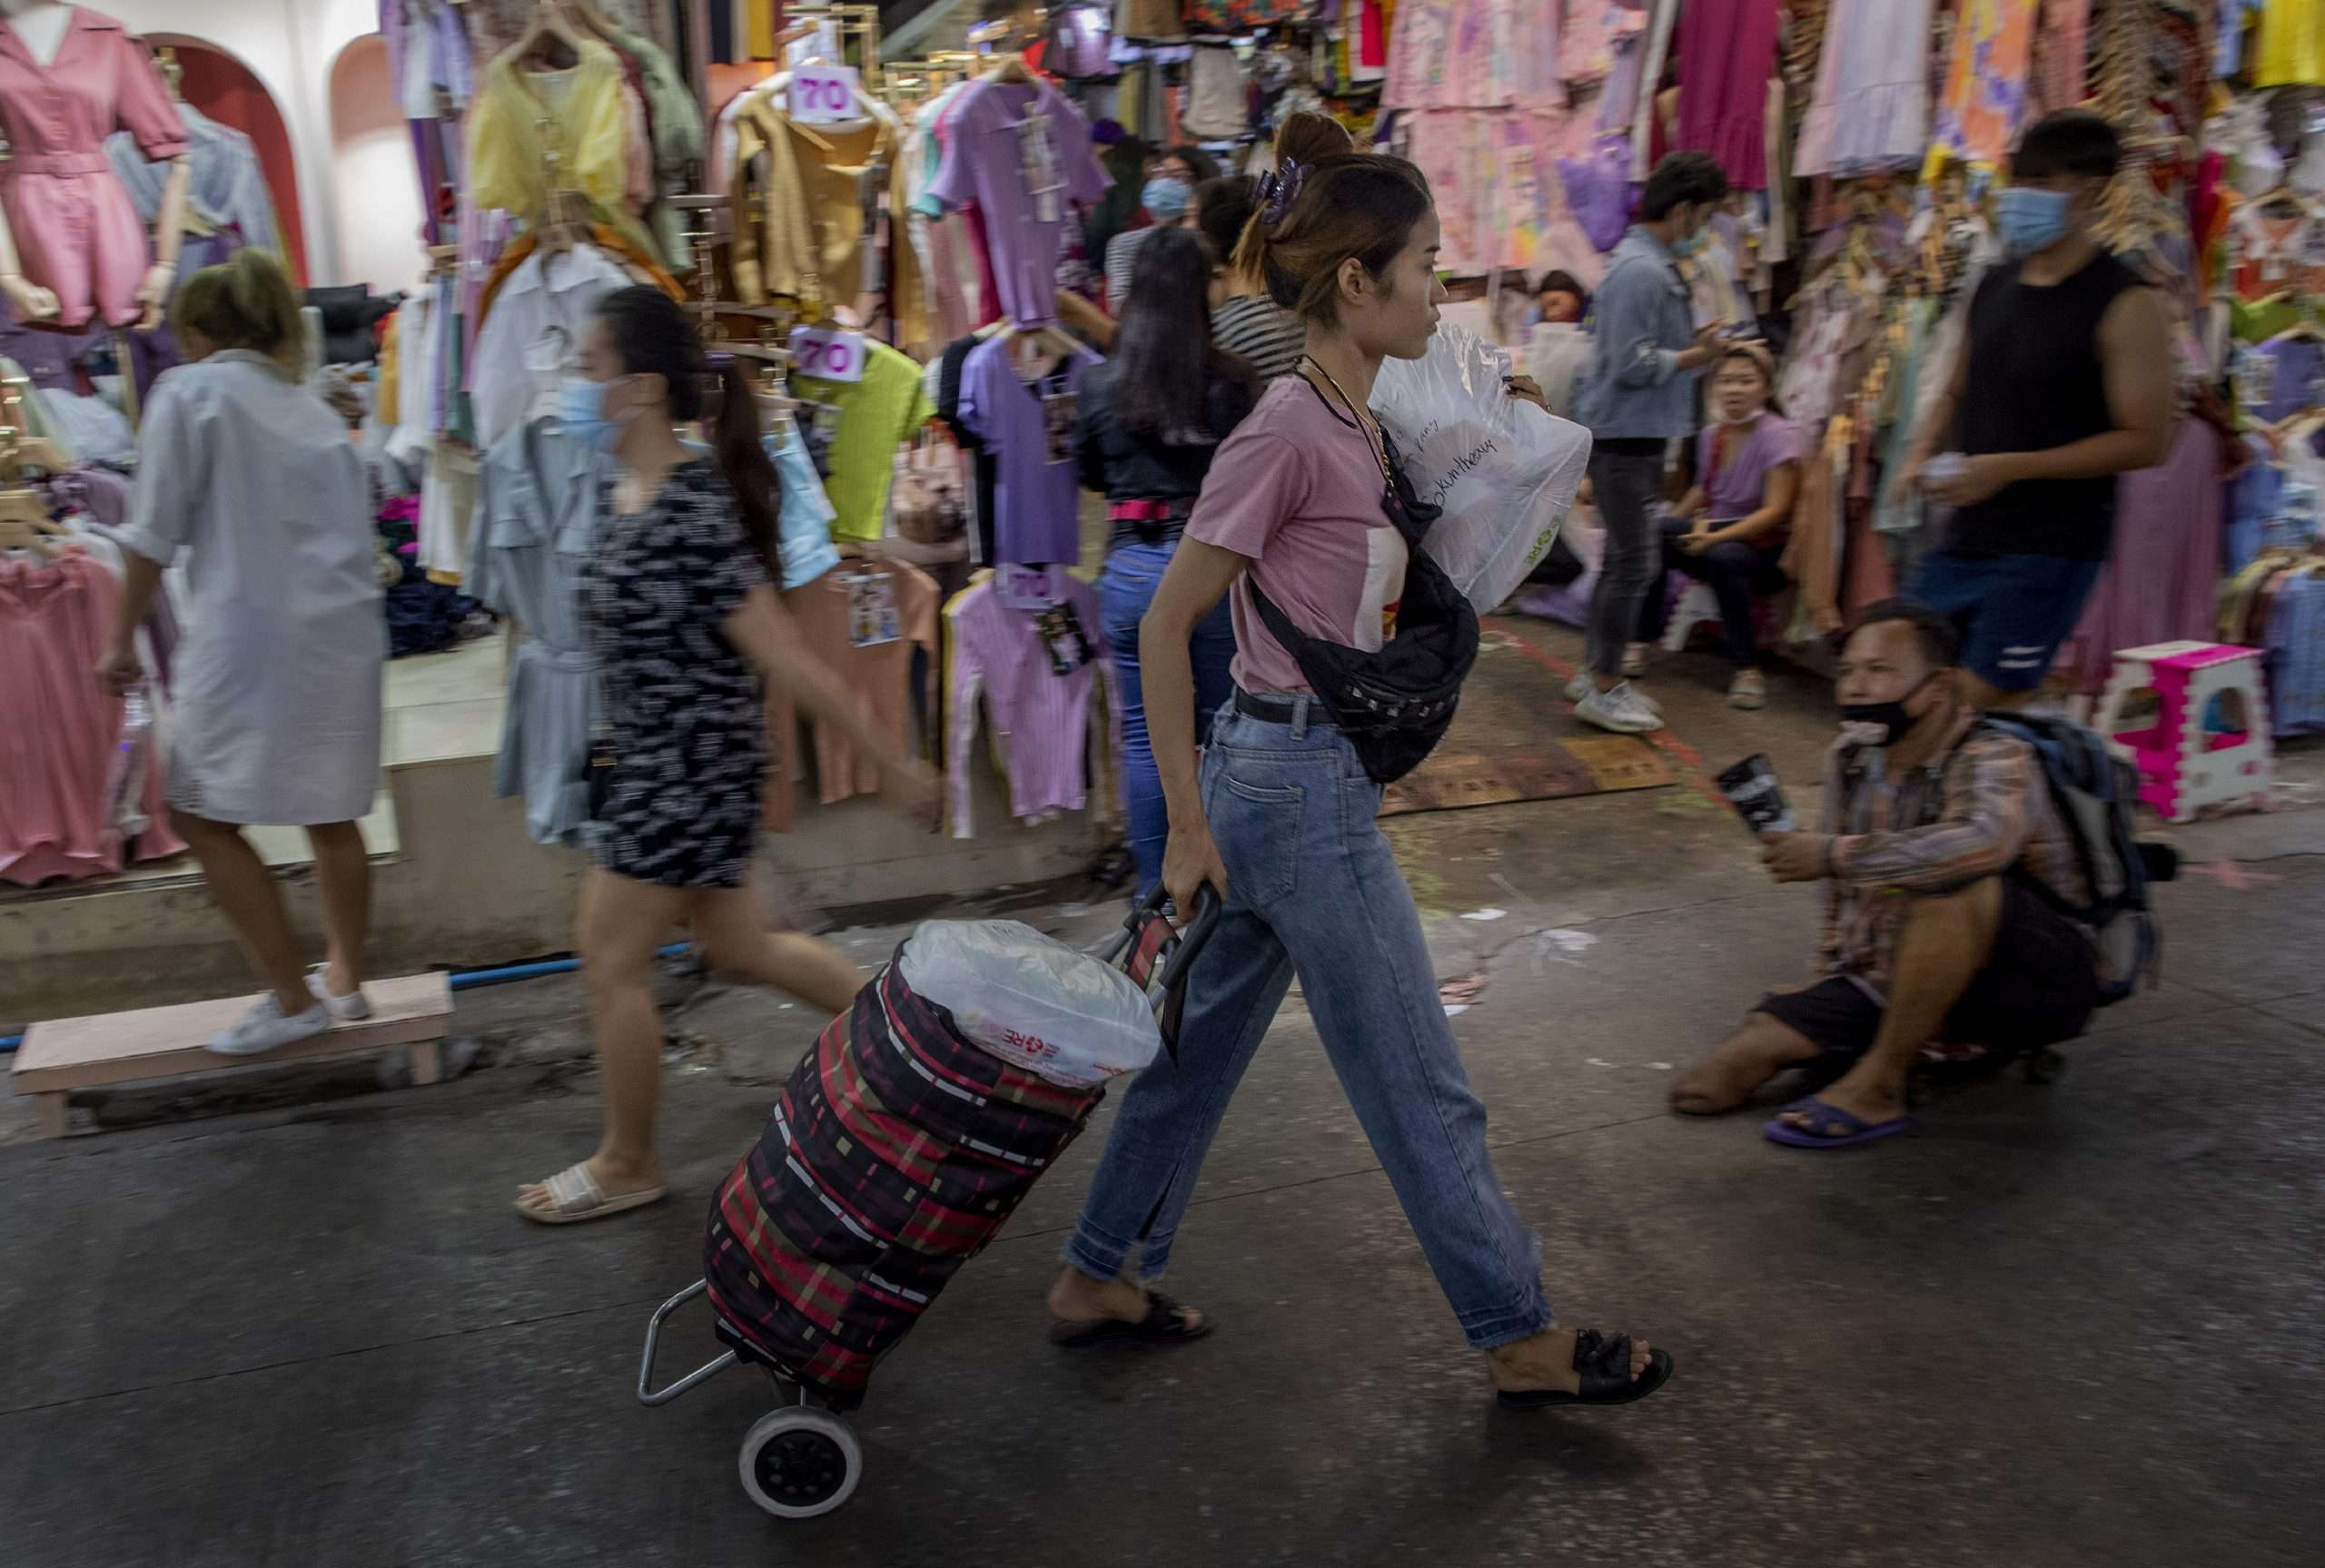 A shopper pulls a cart of clothing at a market in Bangkok, Thailand, one of the small tokens of technology eradicating global poverty.  